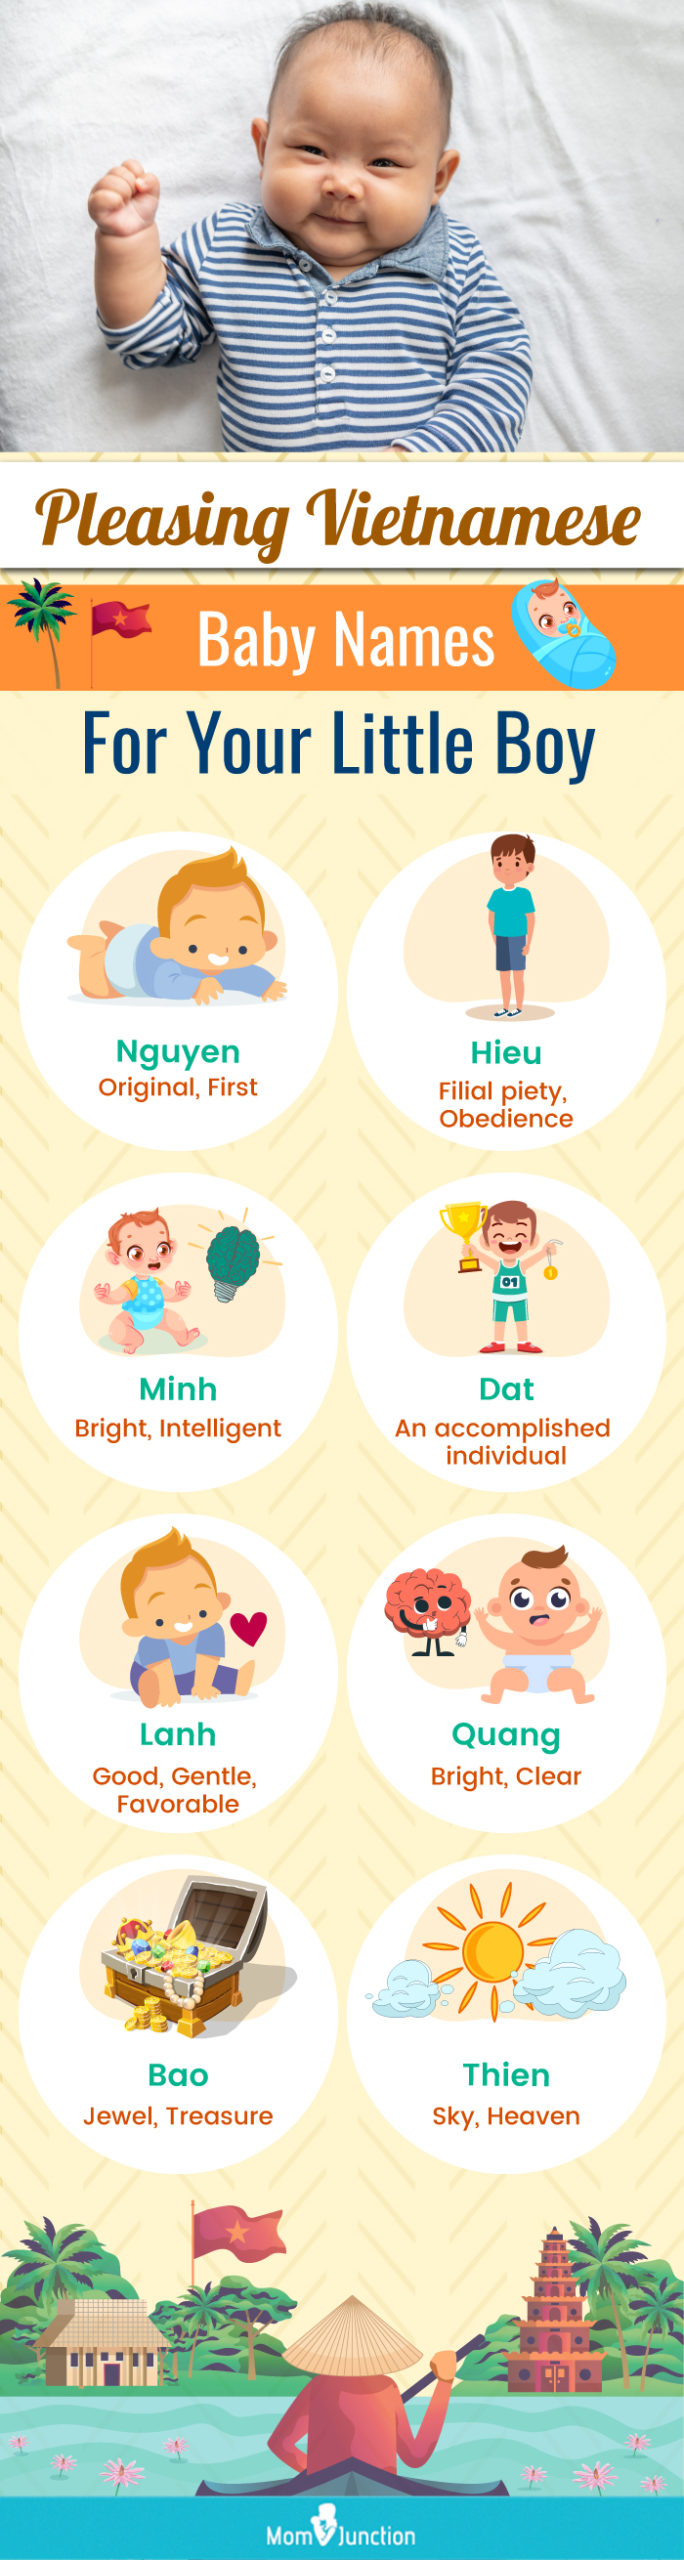 pleasing vietnamese baby names for your little boy (infographic)